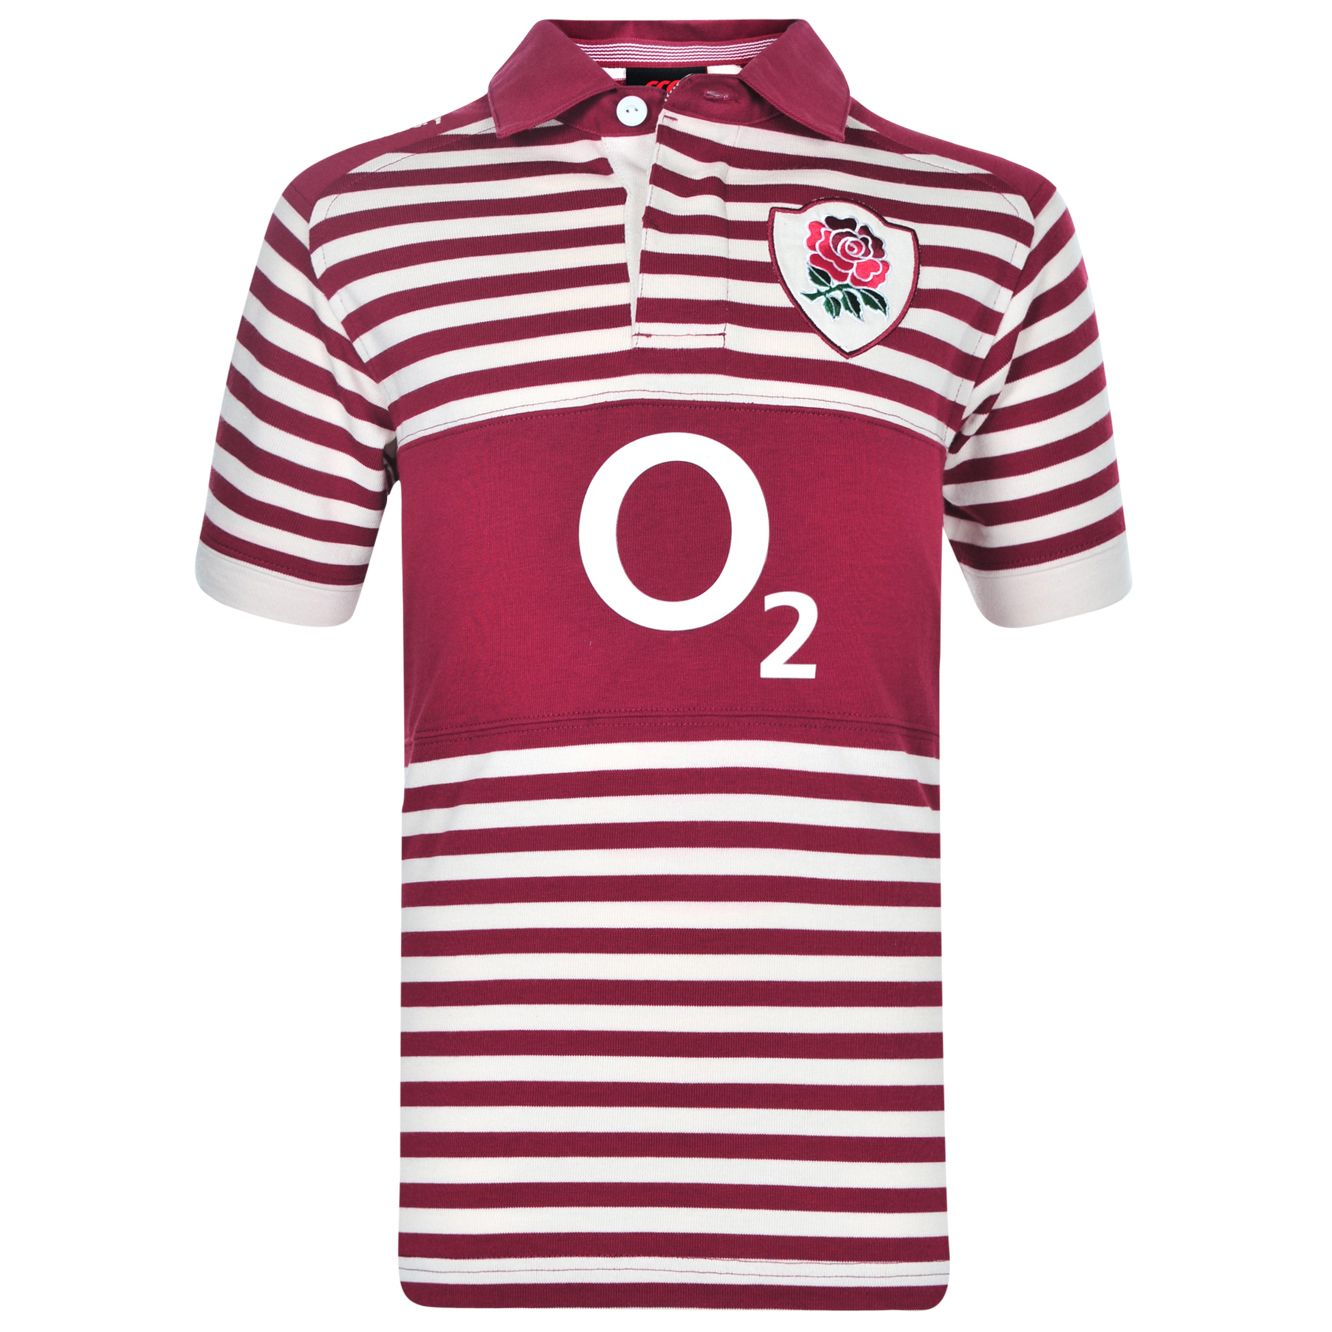 England Alternate Rugby Classic Shirt 2013/14